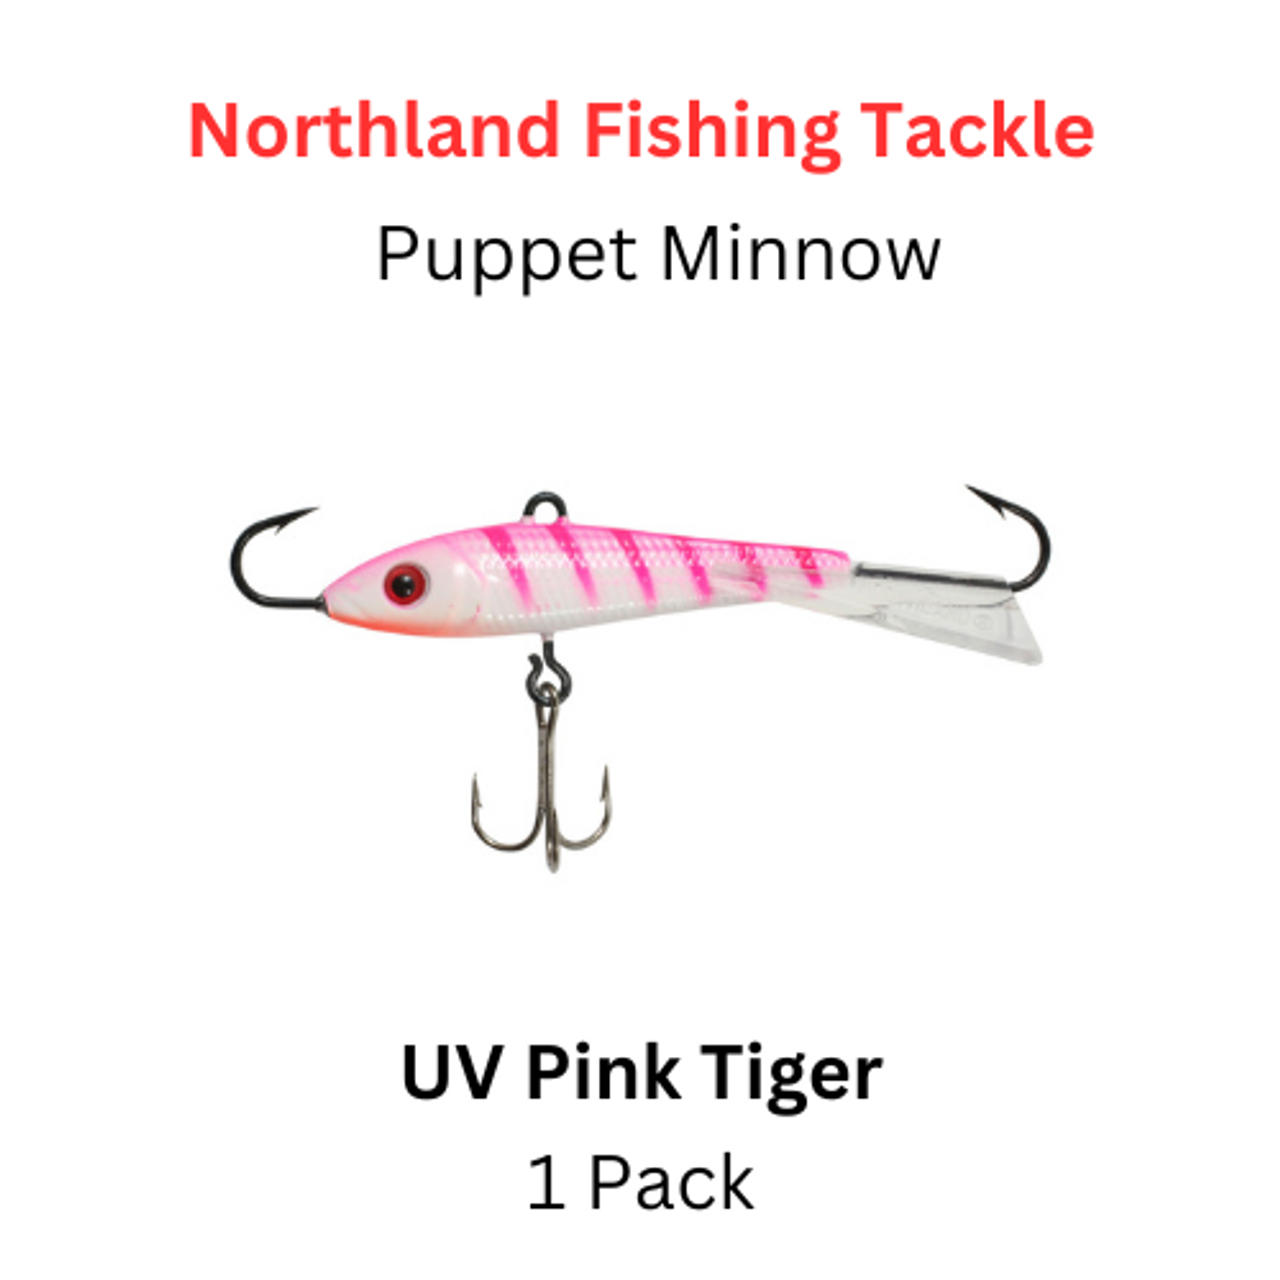 https://cdn11.bigcommerce.com/s-u9nbd/images/stencil/1280x1280/products/6201/15659/Northland_Fishing_Tackle_Puppet_Minnow_UV_Pink_Tiger__90025.1676756829.png?c=2?imbypass=on